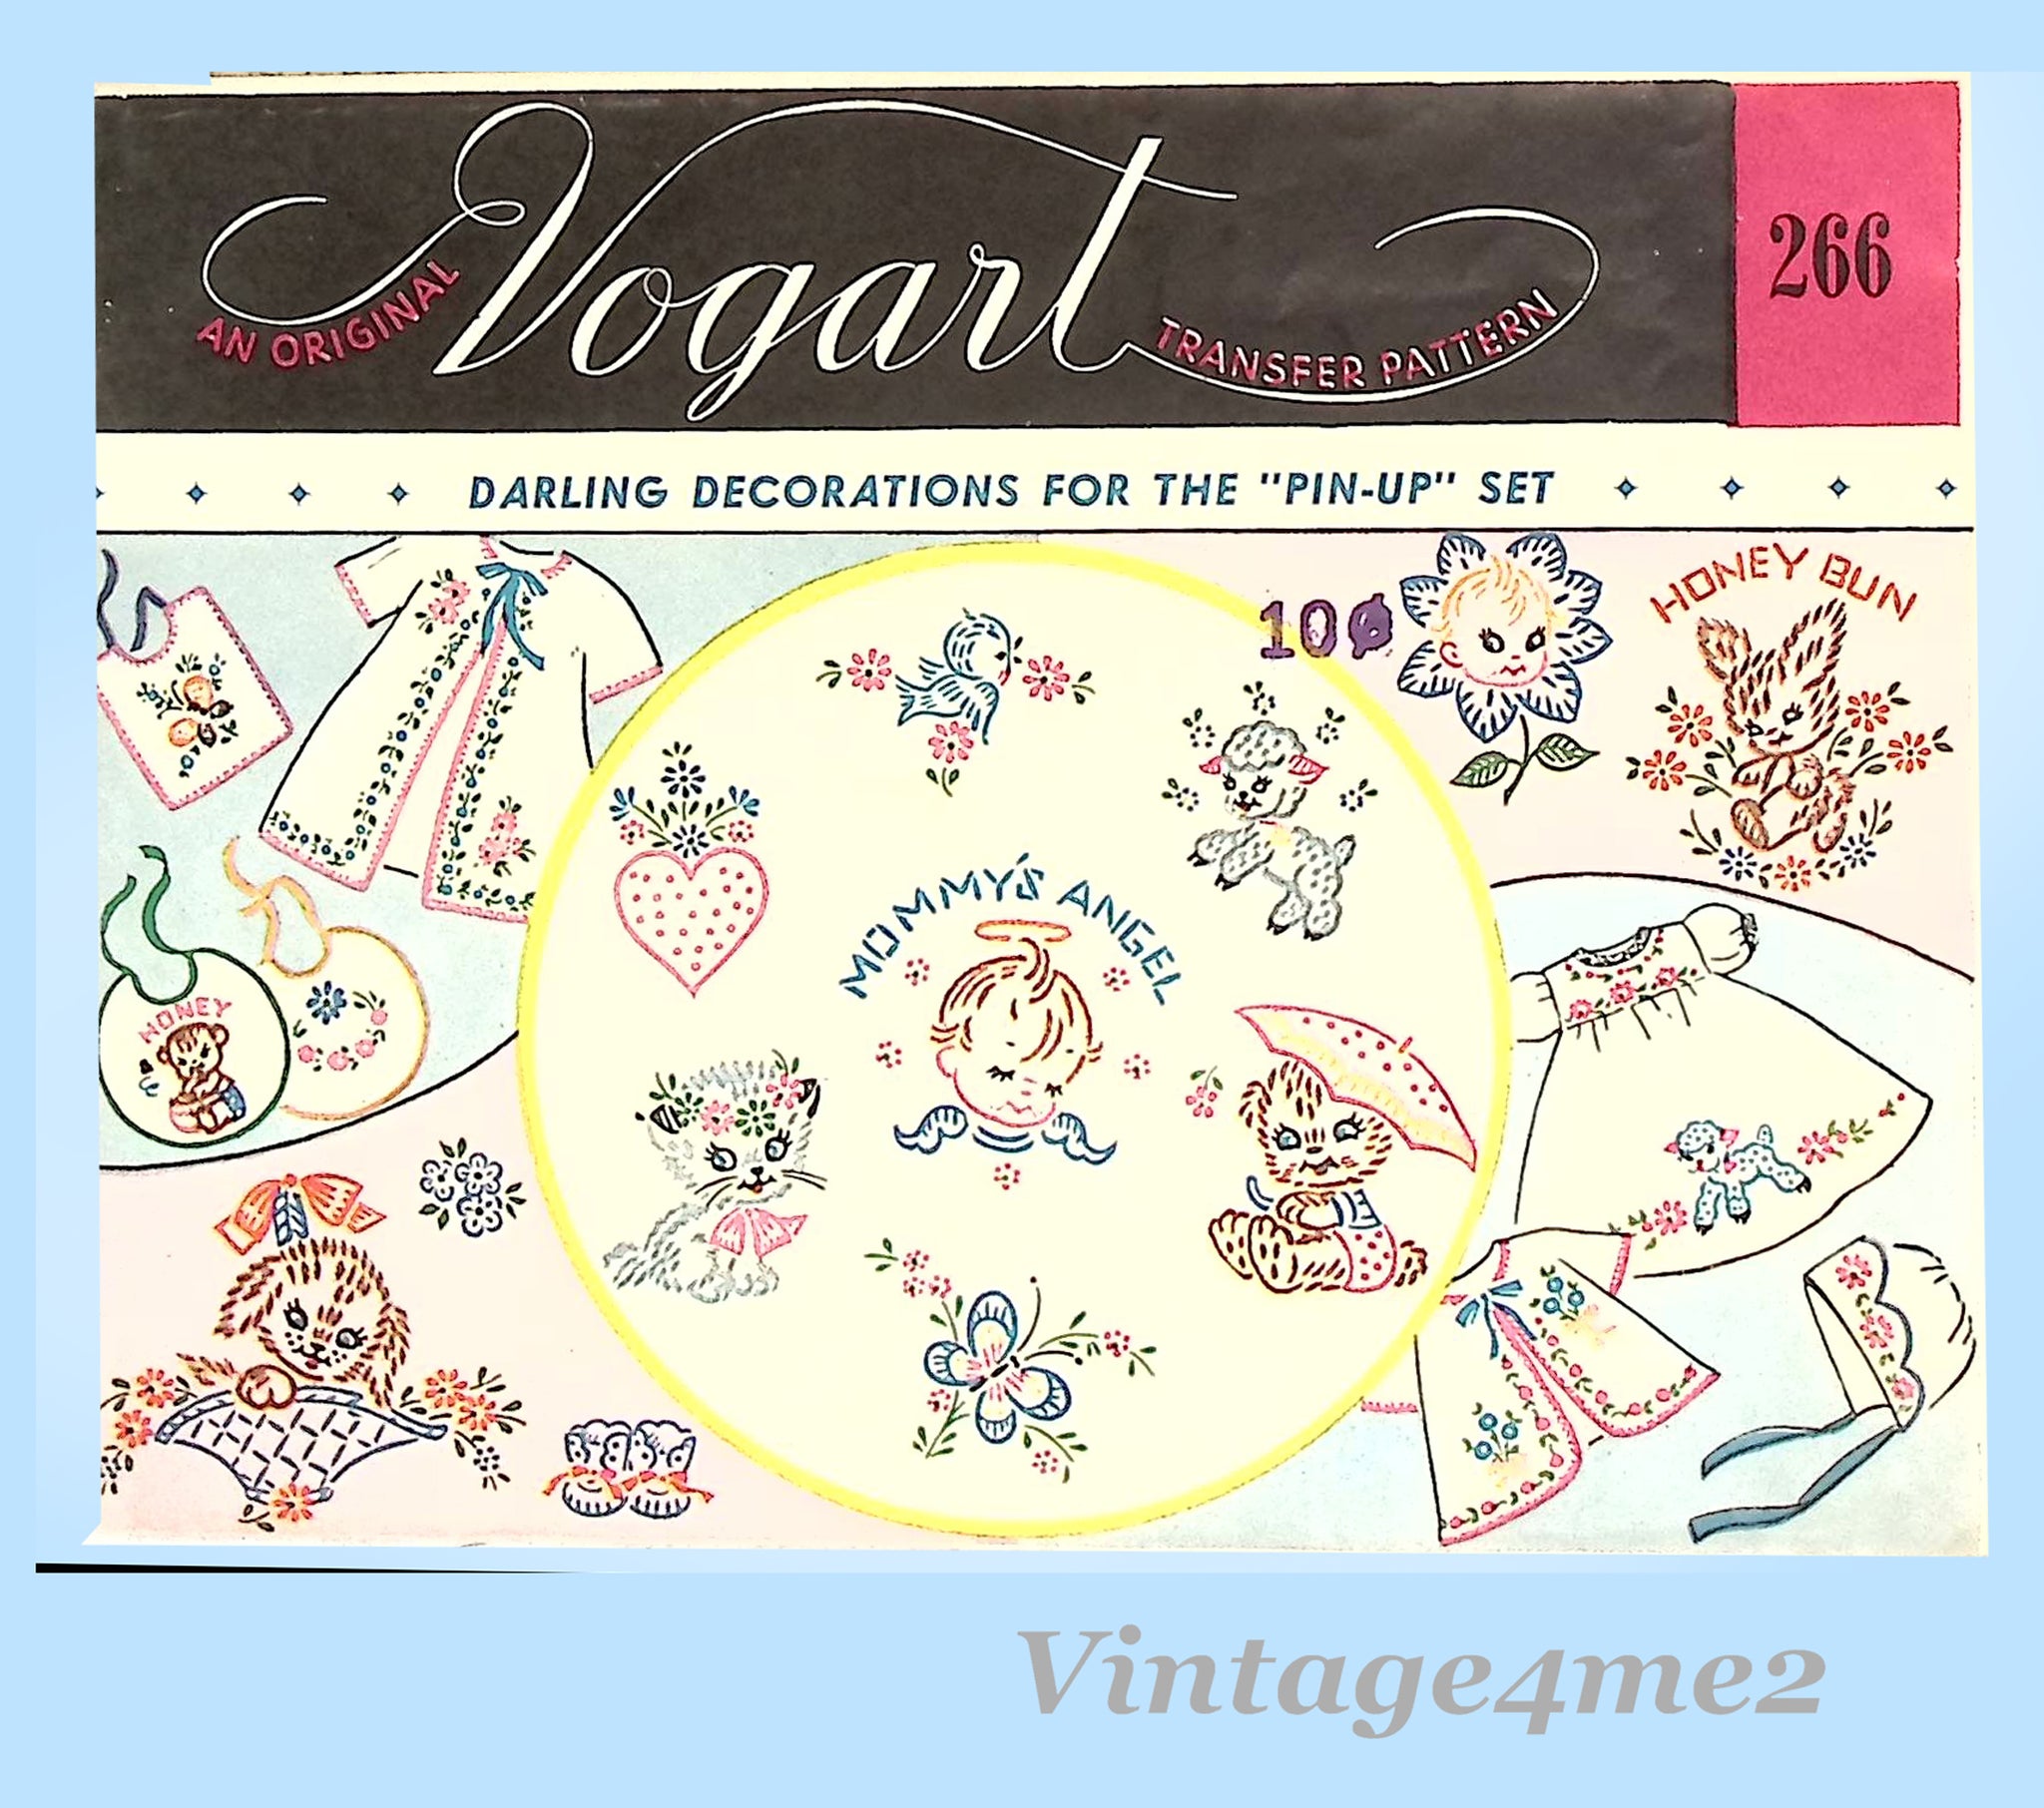 Vintage Embroidery Pattern Transfers VOGART and 50 similar items